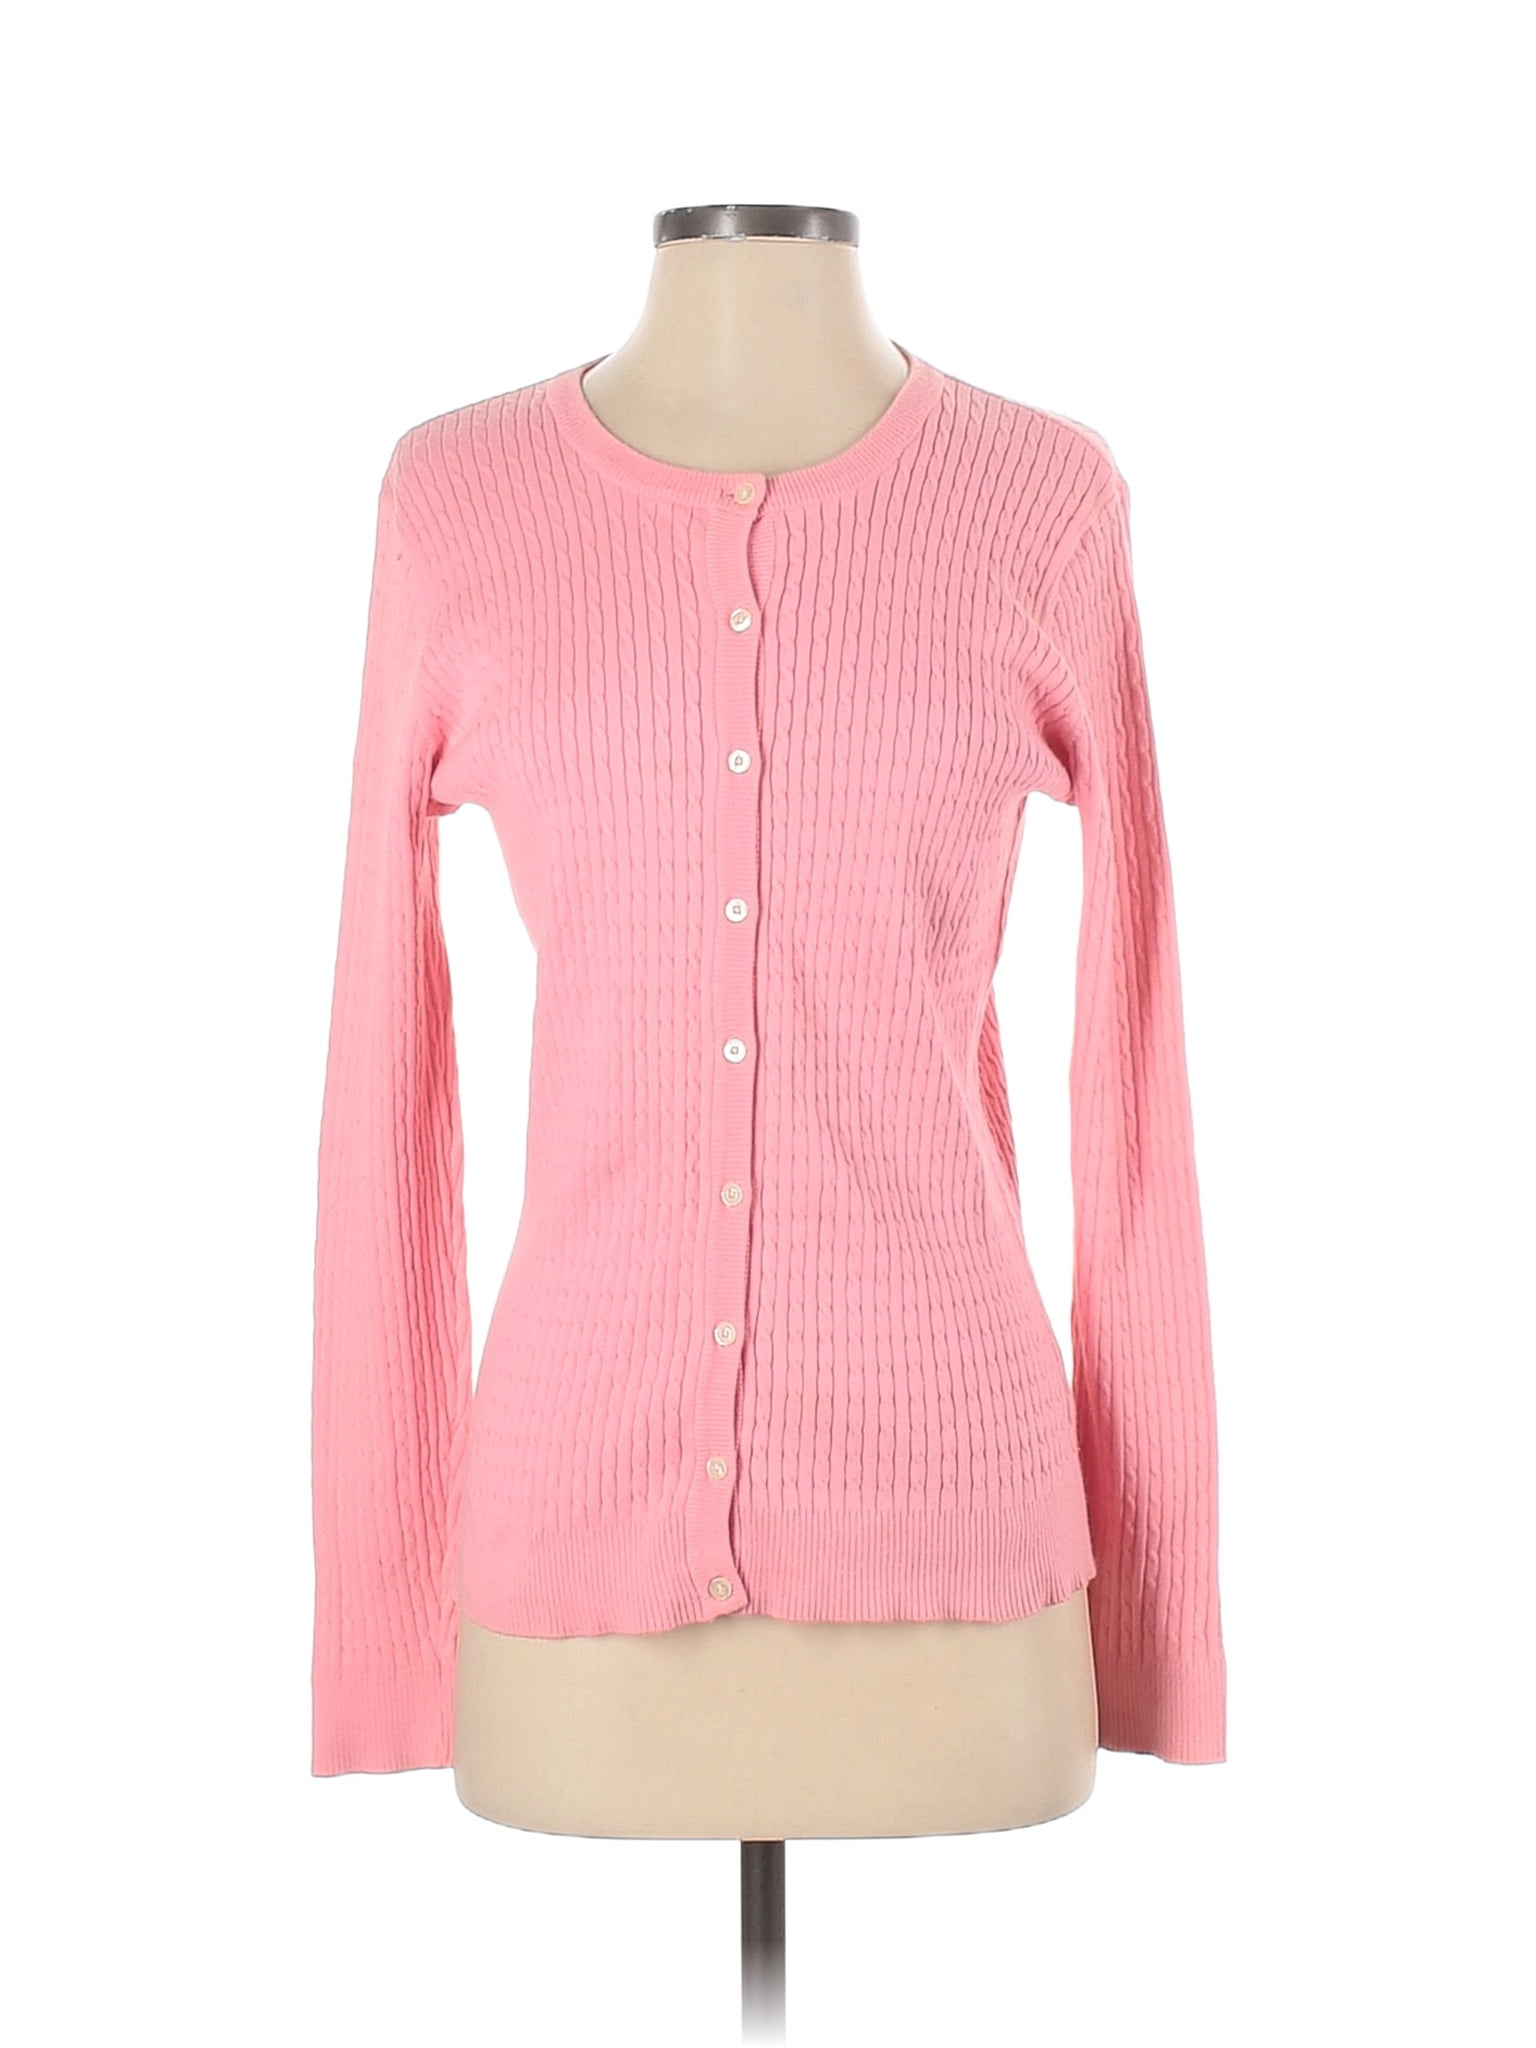 Lilly Pulitzer Checkered-gingham Color Block Pink Cardigan Size S - 74% ...